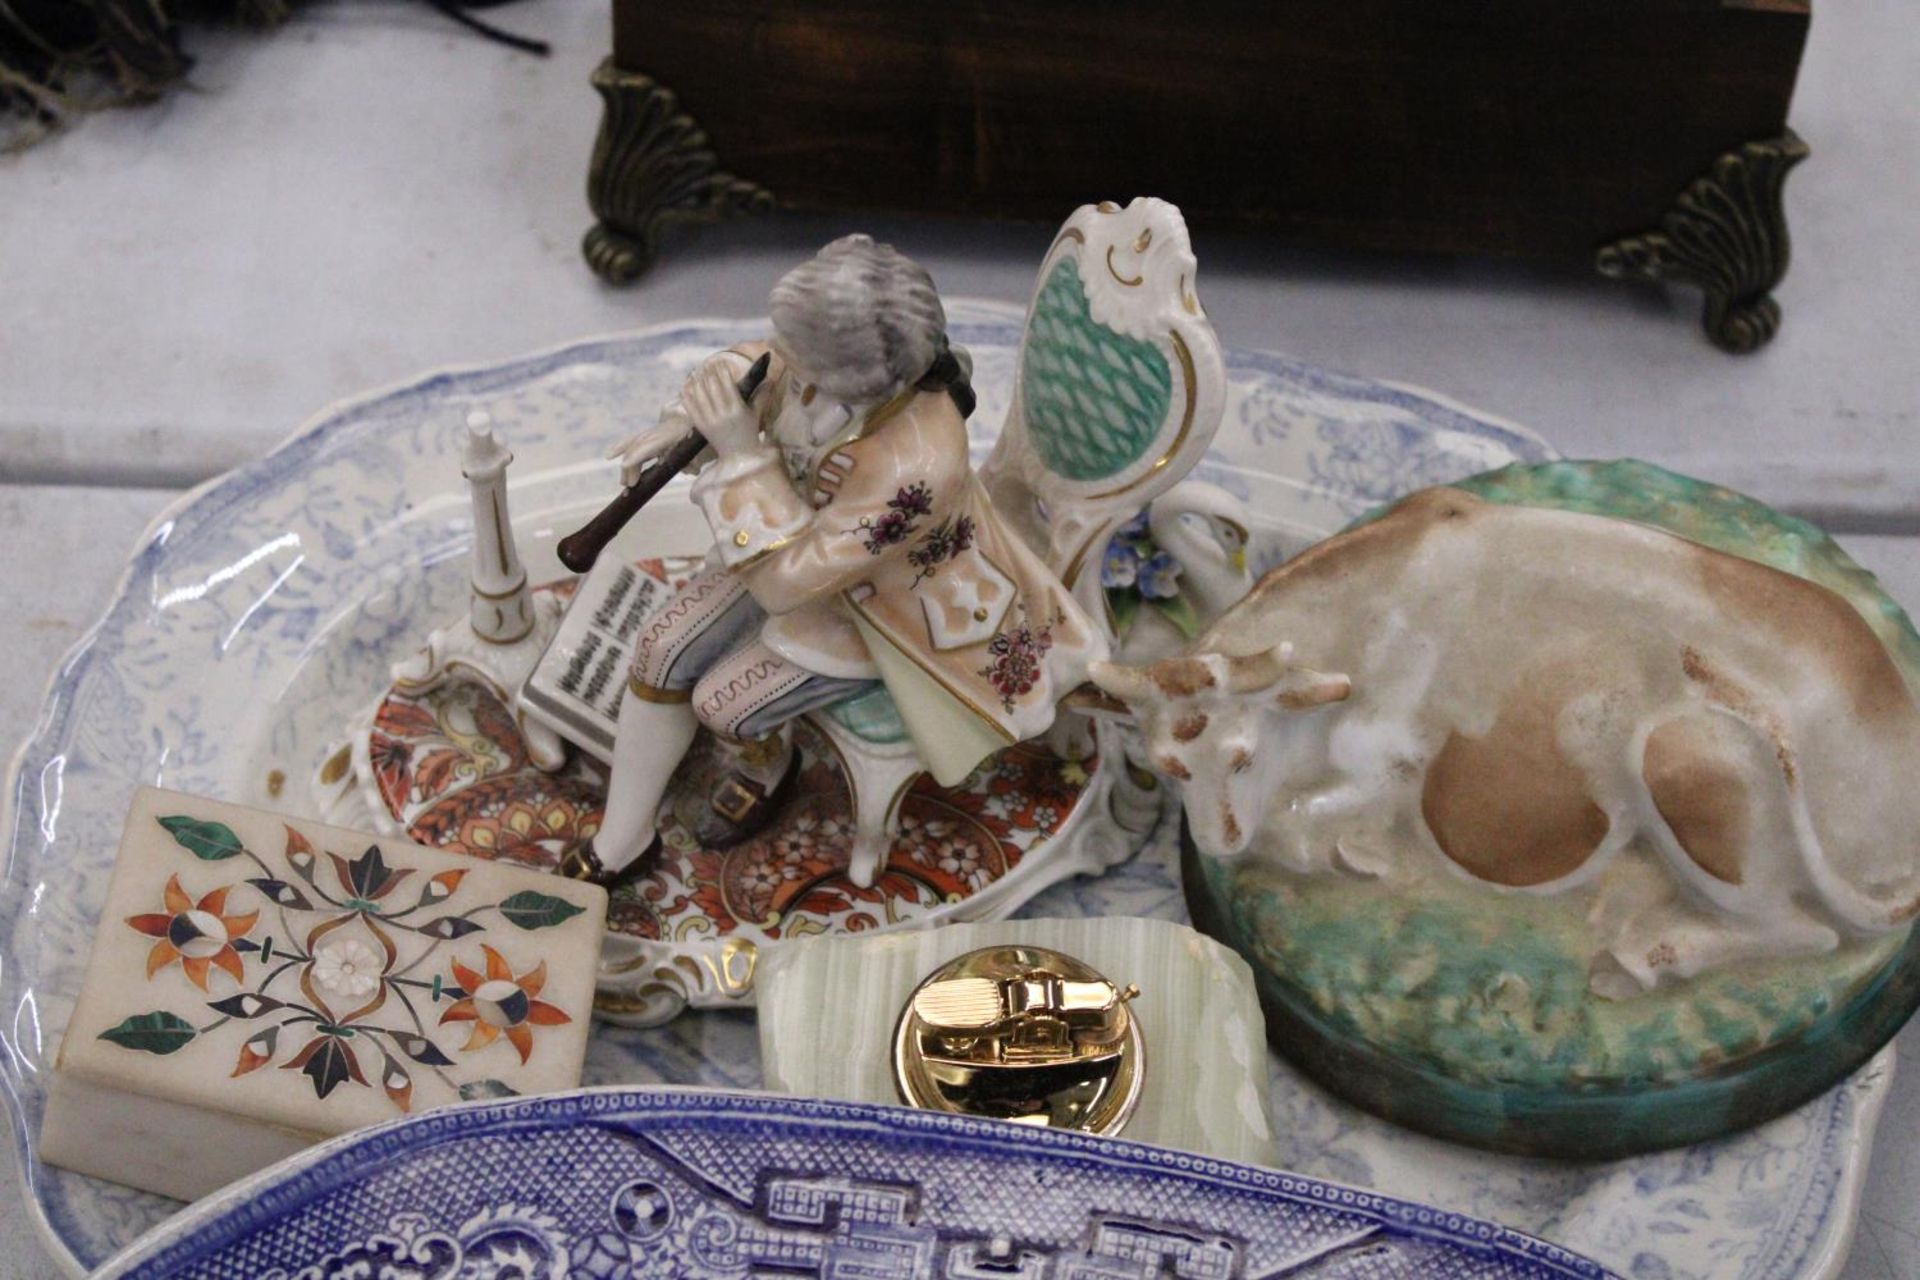 TWO VINTAGE BLUE AND WHITE PLATTERS, CABINET PLATES, AN ONYX TABLE LIGHTER, TRINKET BOX AND FIGURINE - Image 2 of 6